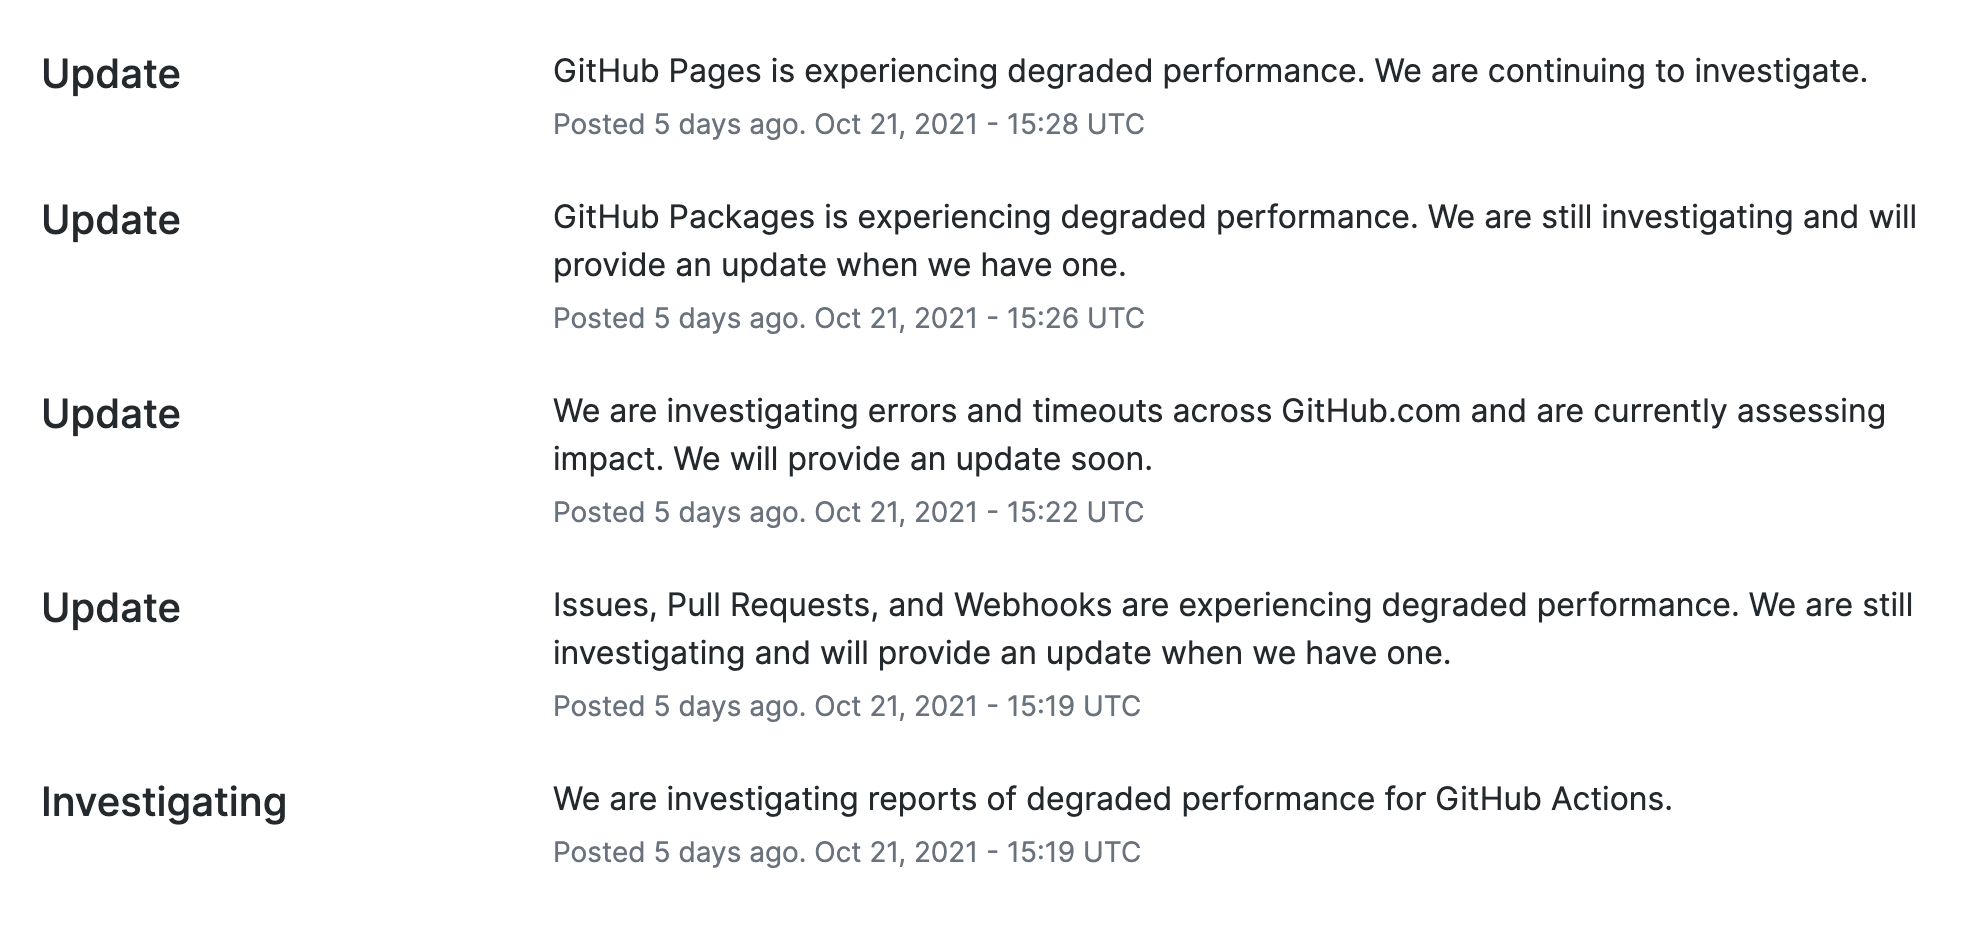 GitHub demonstrating the power of repeat 'investigation' updates (source)